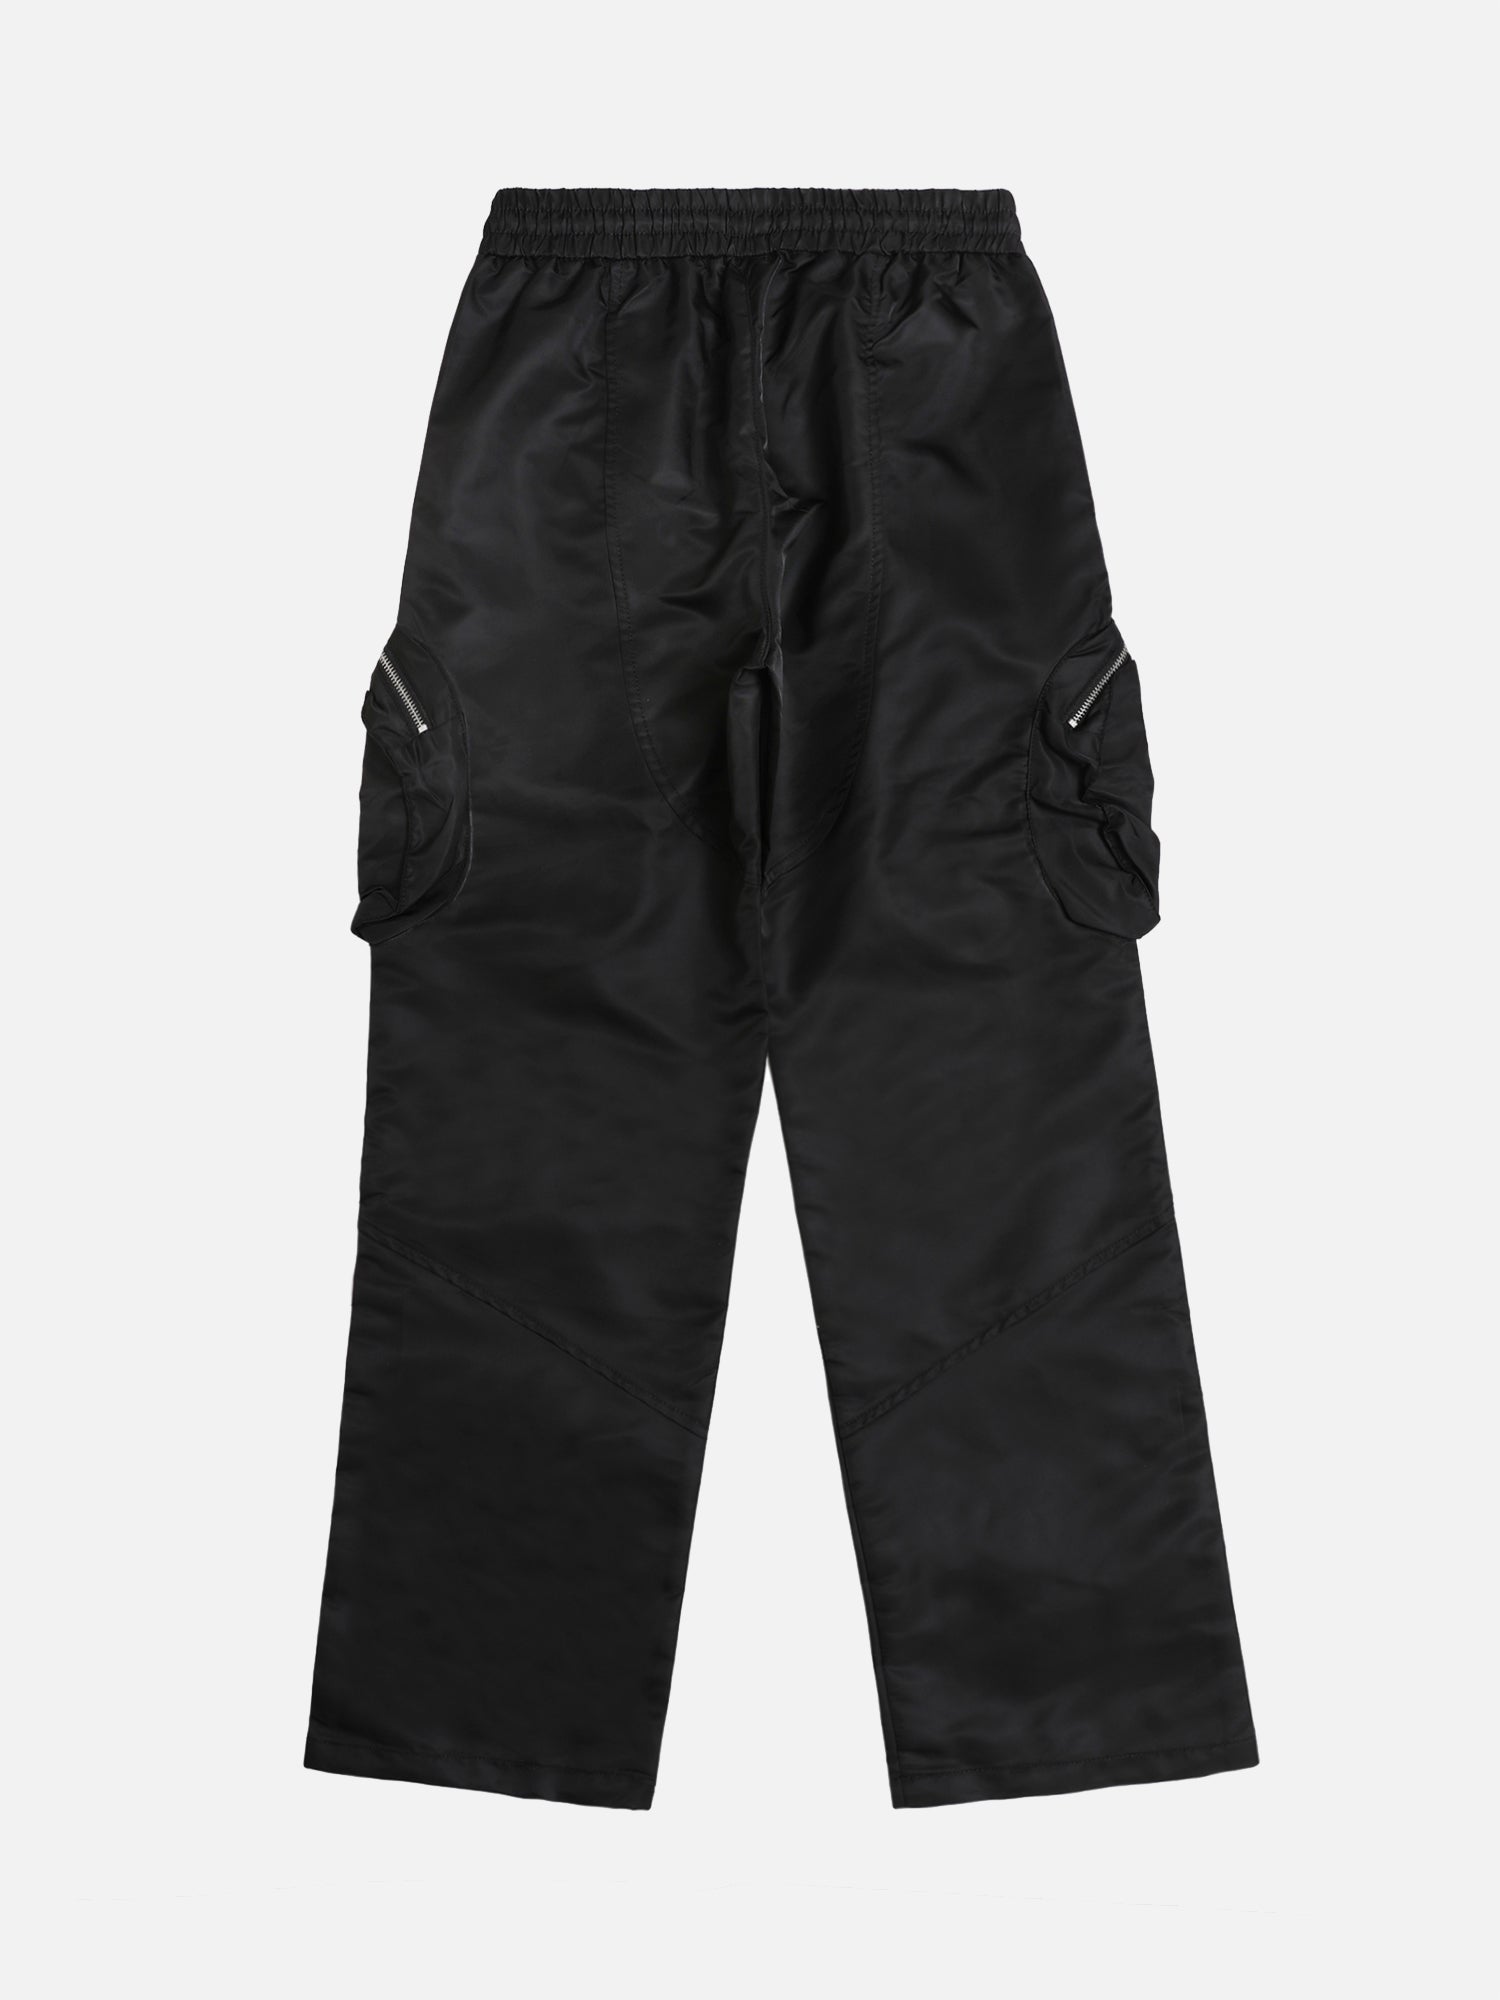 Street Fashion Brand Special-shaped Pocket Cargo Casual Sweatpants